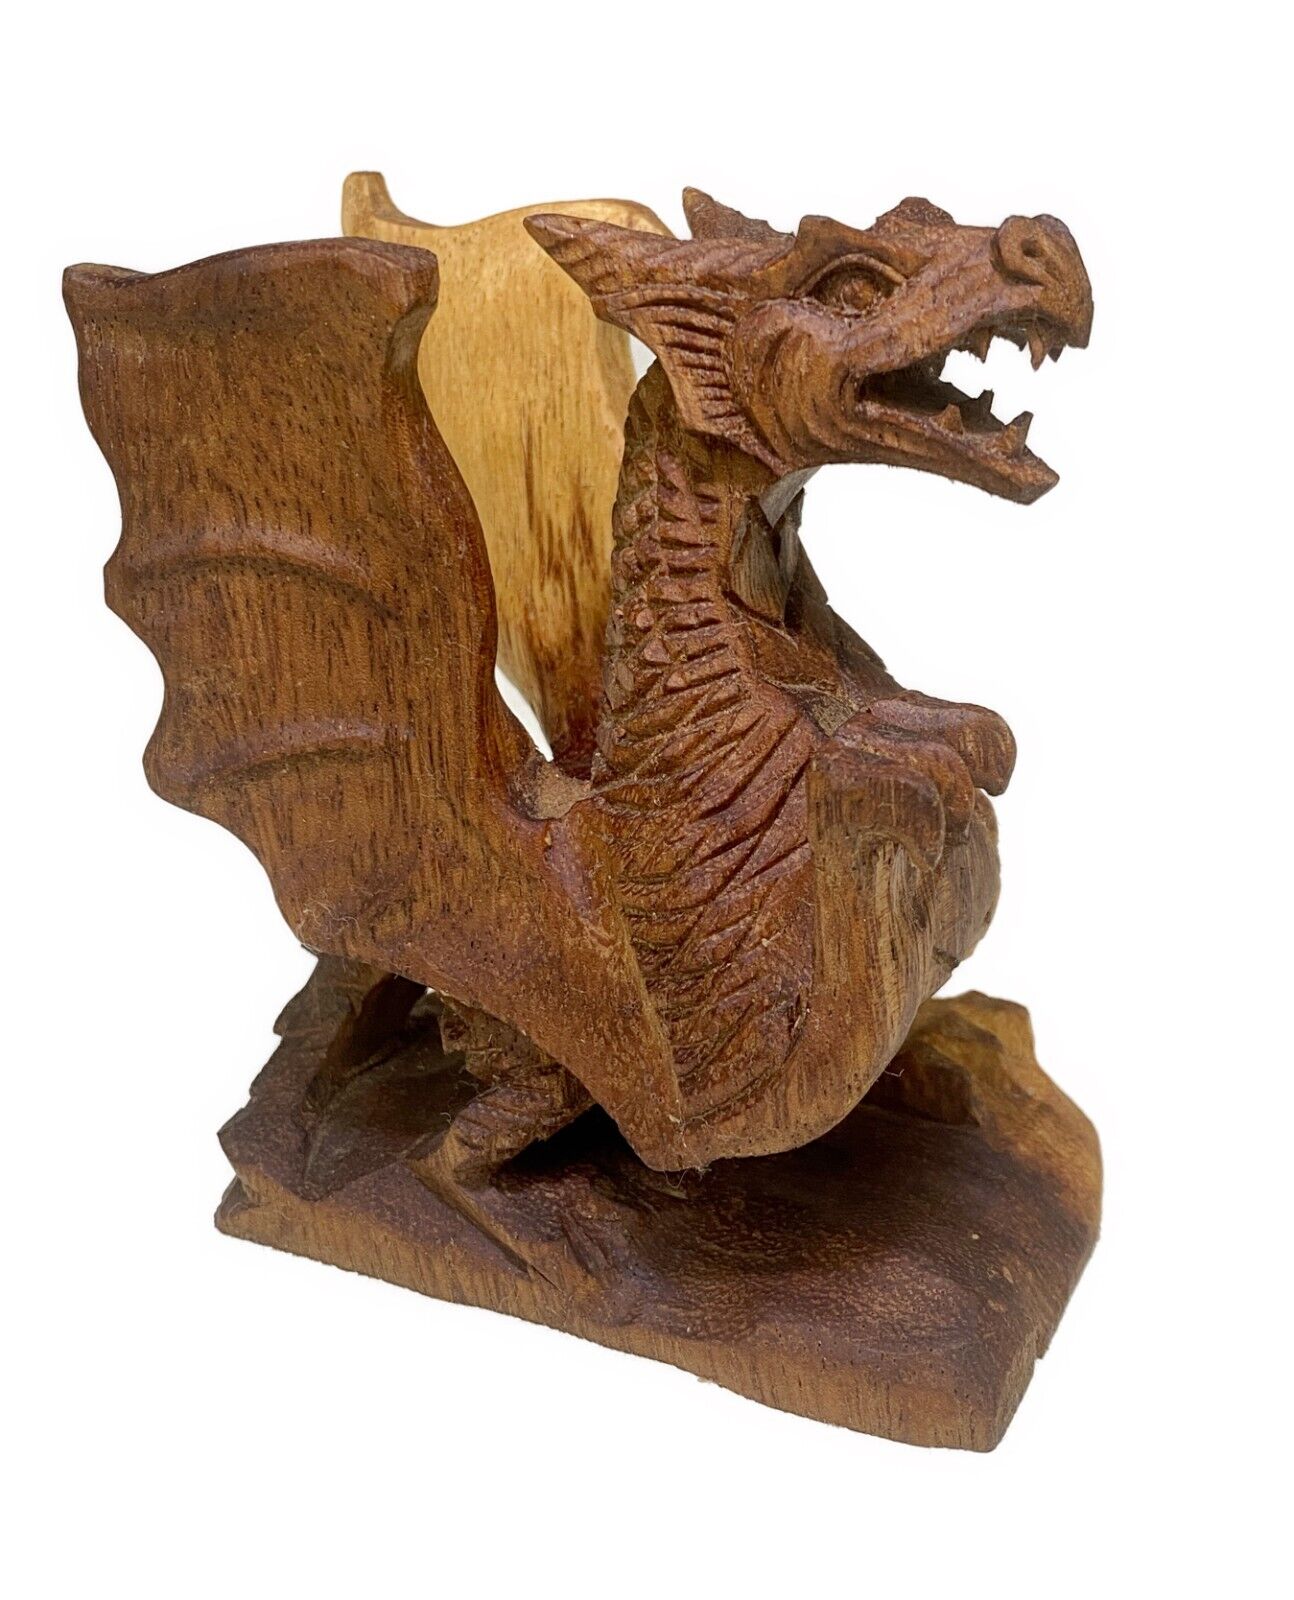 4” Dragon Small Carved Wood Figurine Sculpture GOT DND Colors may vary